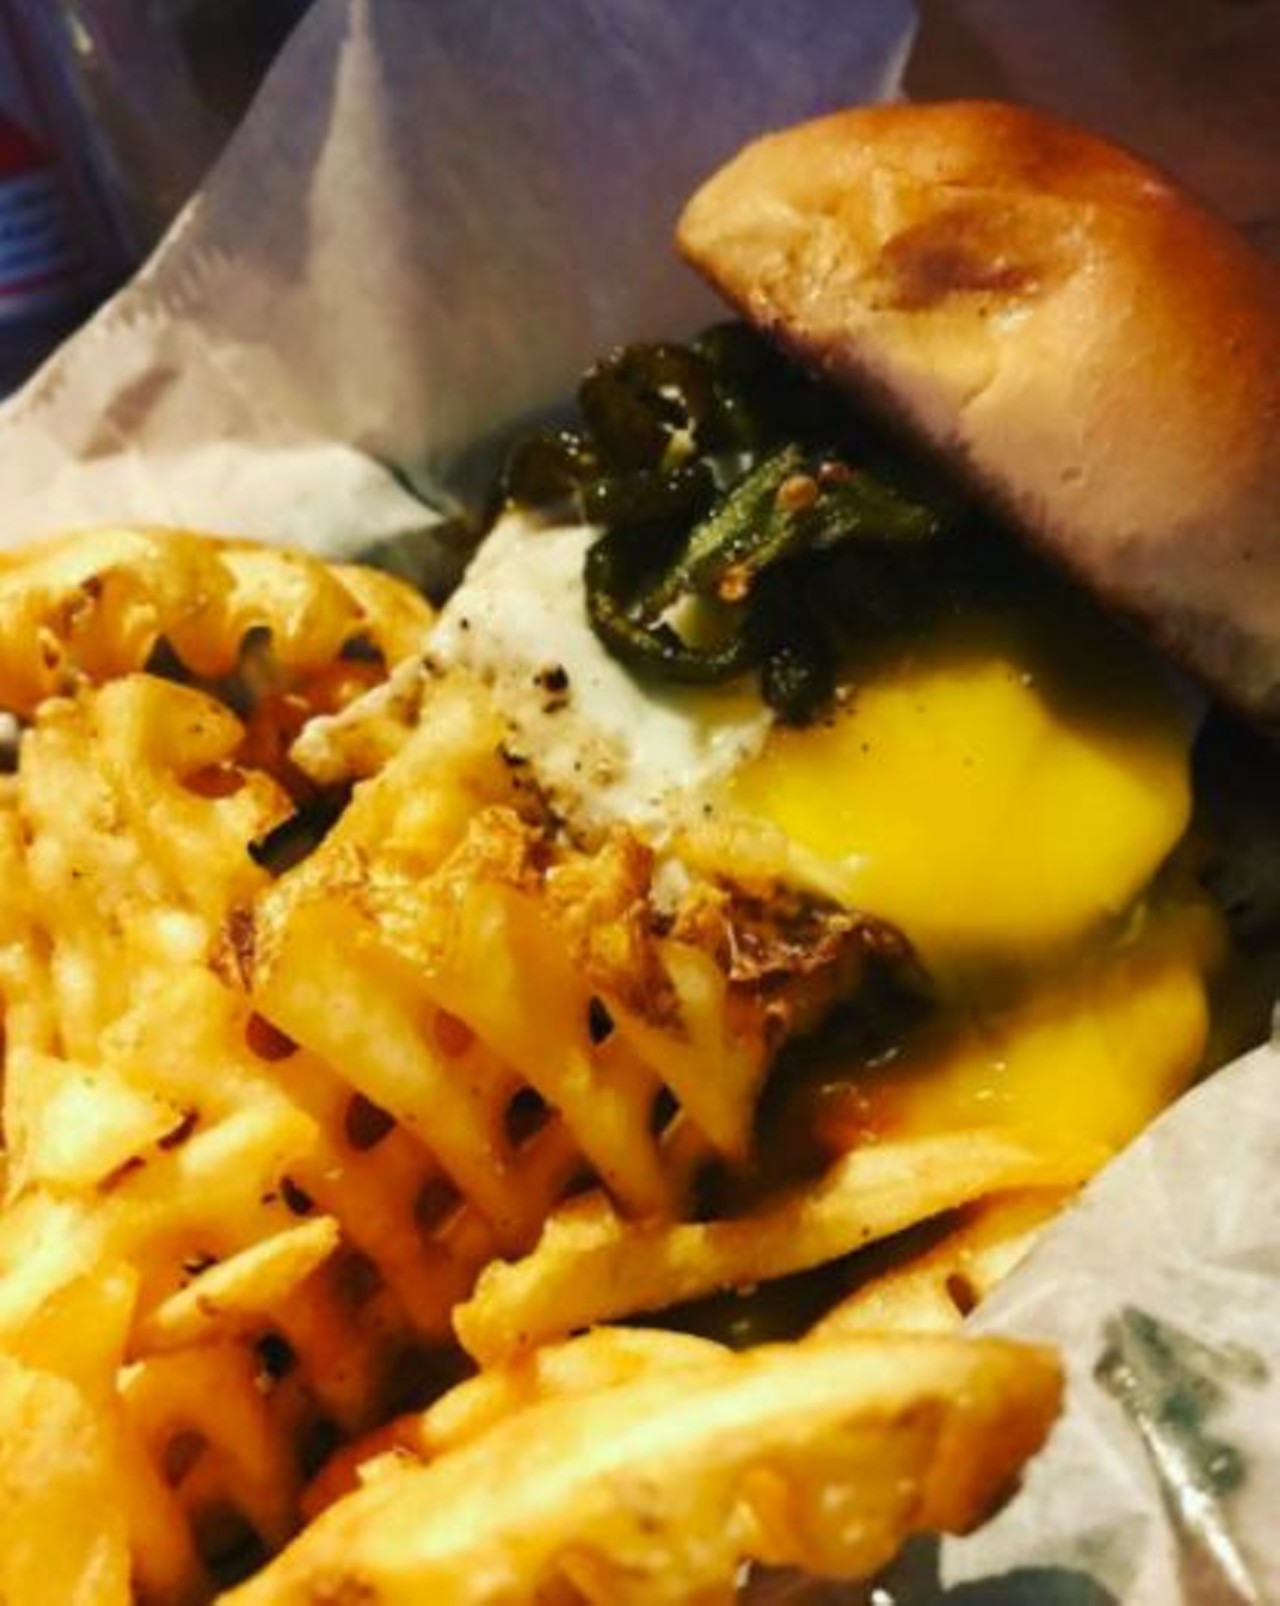  Nano Brew Cleveland
1859 W. 25th St., 216-862-6631
Pair one of Nano Brew's award-winning burgers (or sliders) with any of their 24 draft beers &#151;&nbsp;they've got you covered until 2:30 a.m.
Photo via dangerously_gluttonous/Instagram